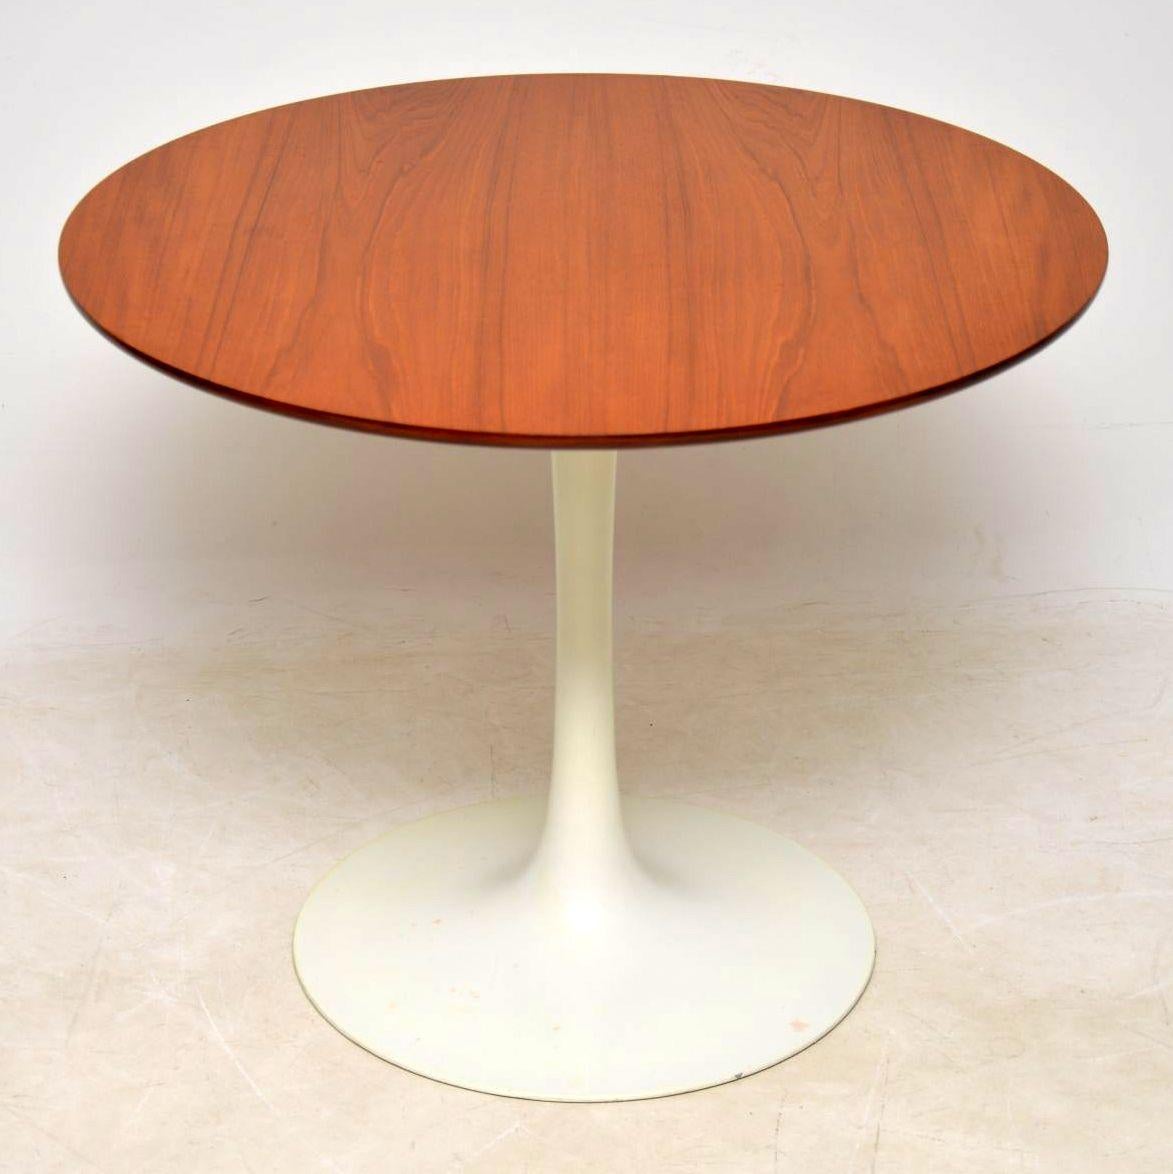 A stylish and iconic vintage dining table, designed by Maurice Burke for Arkana, dating from the 1960s. This rarely seen teak topped version has a white metal tulip shaped base, the top is a useful size, big enough to dine from, but not too